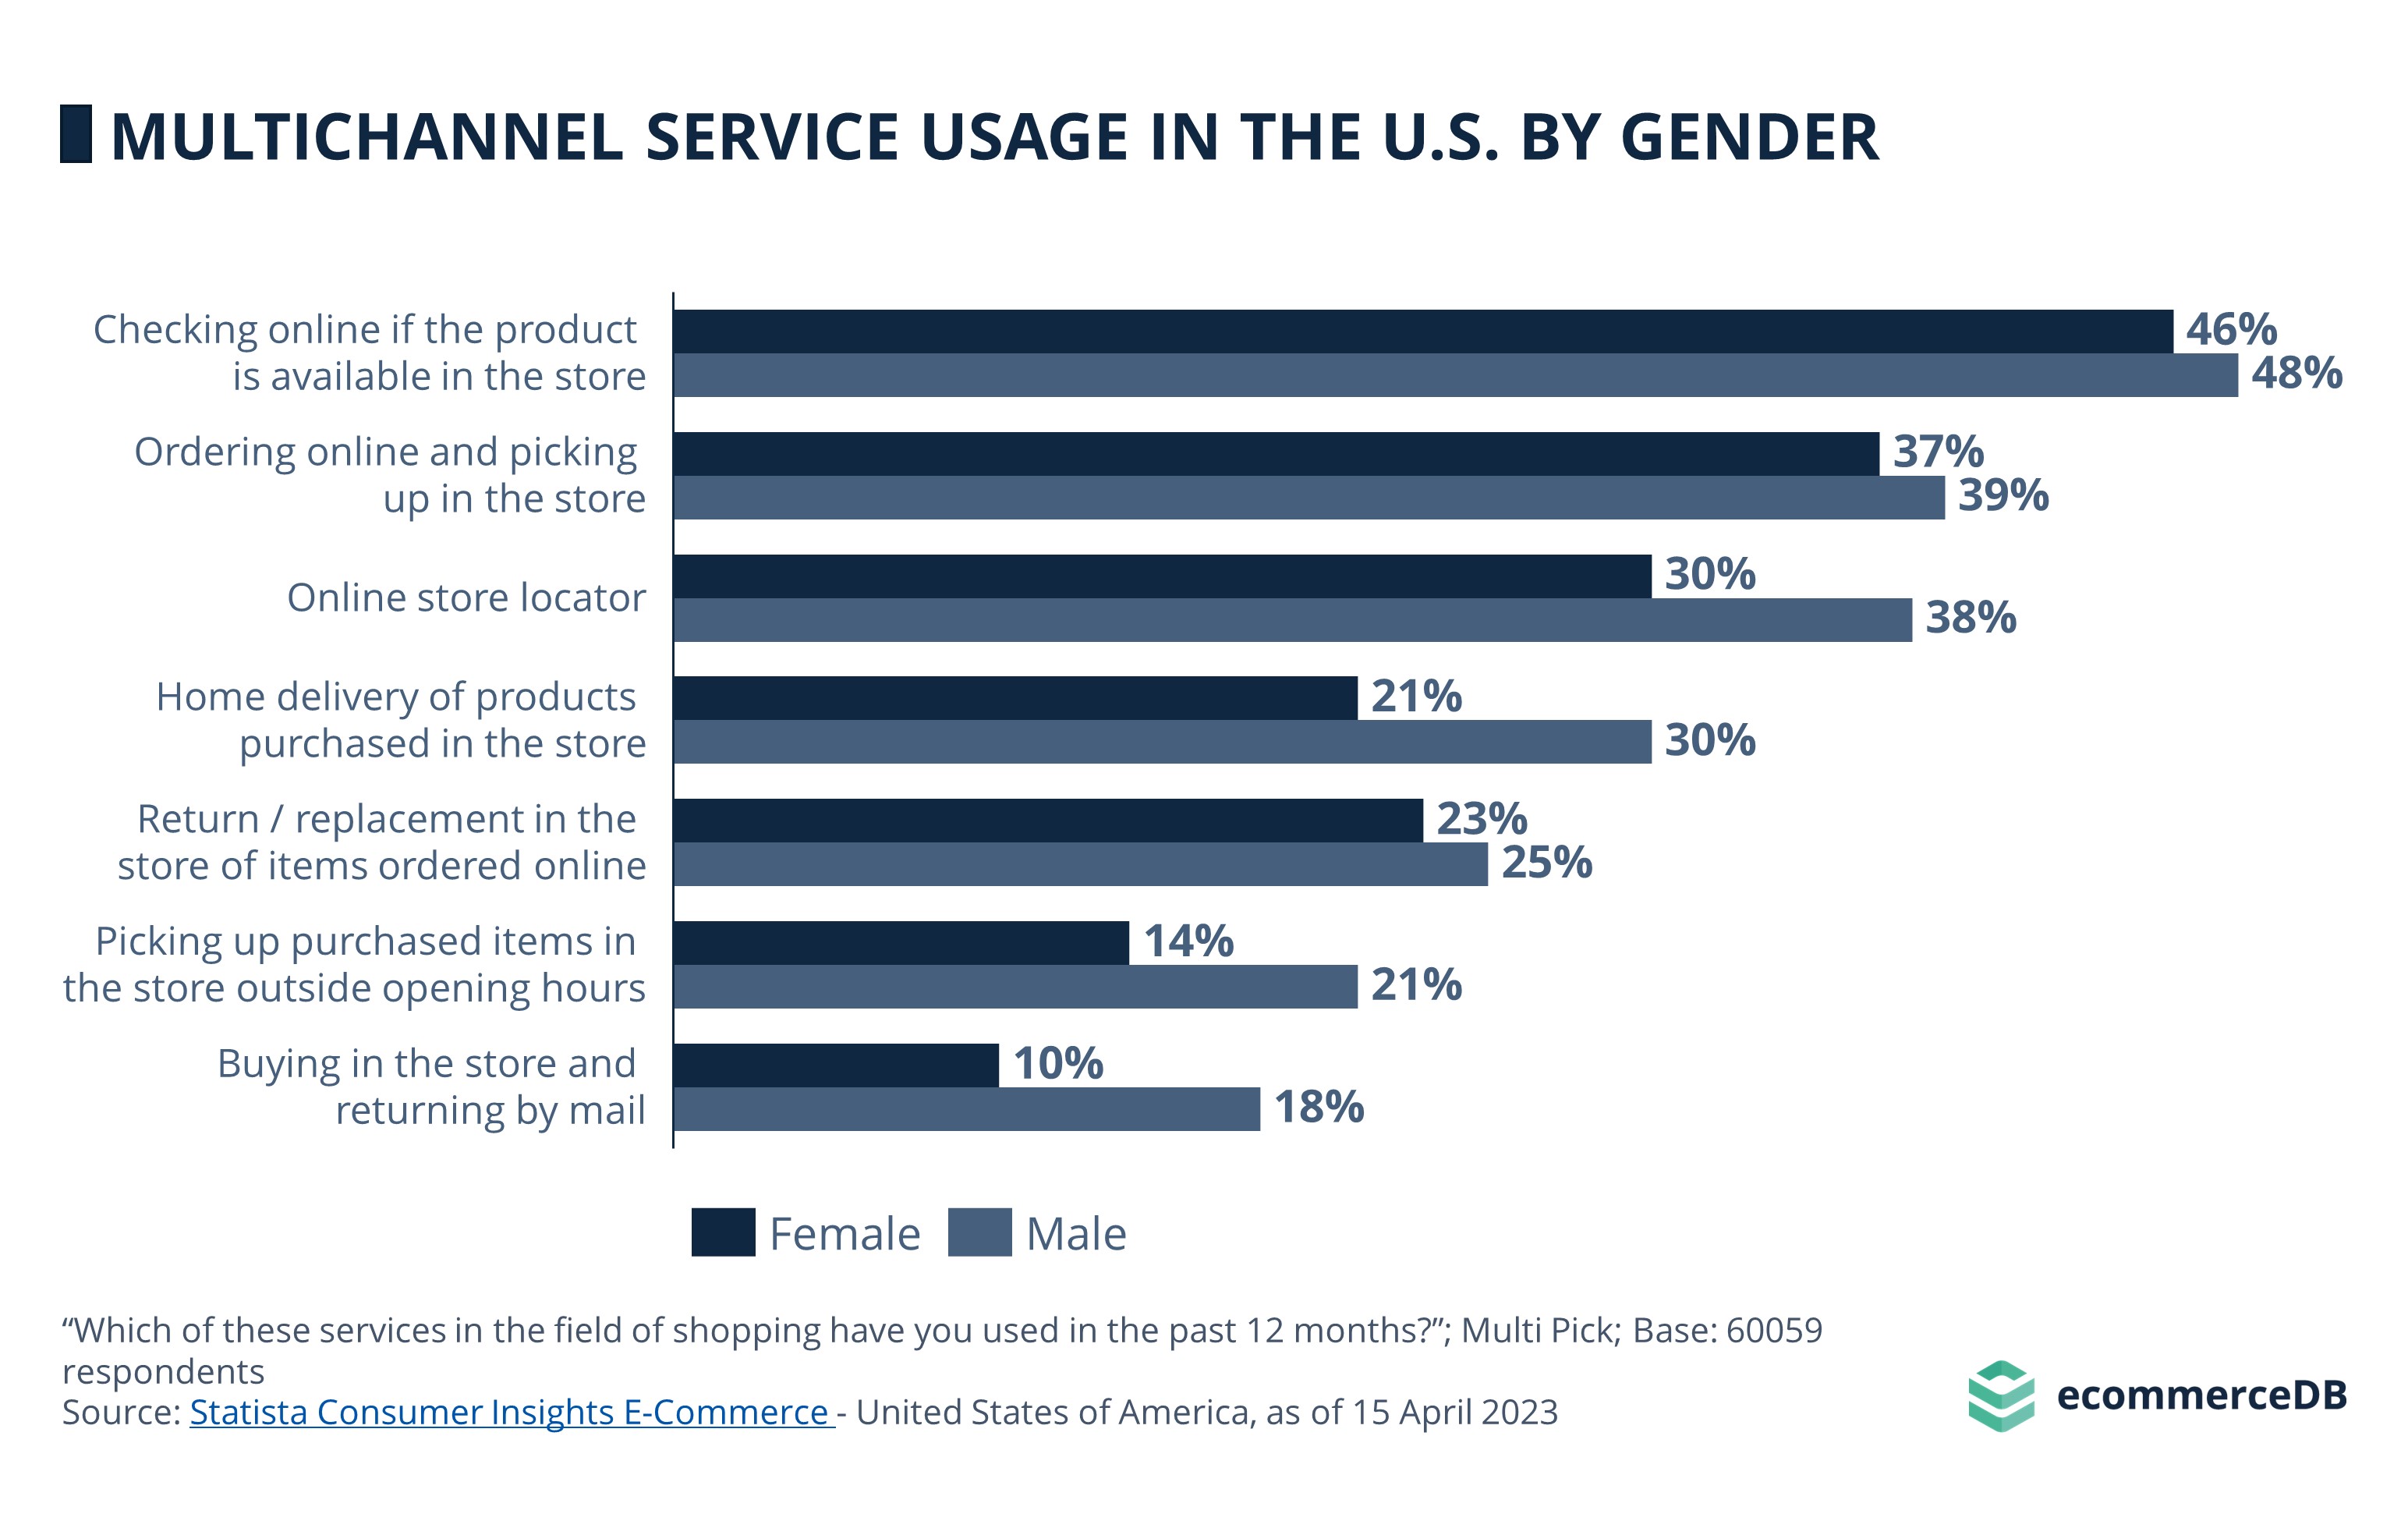 Multichannel service usage in the US by gender